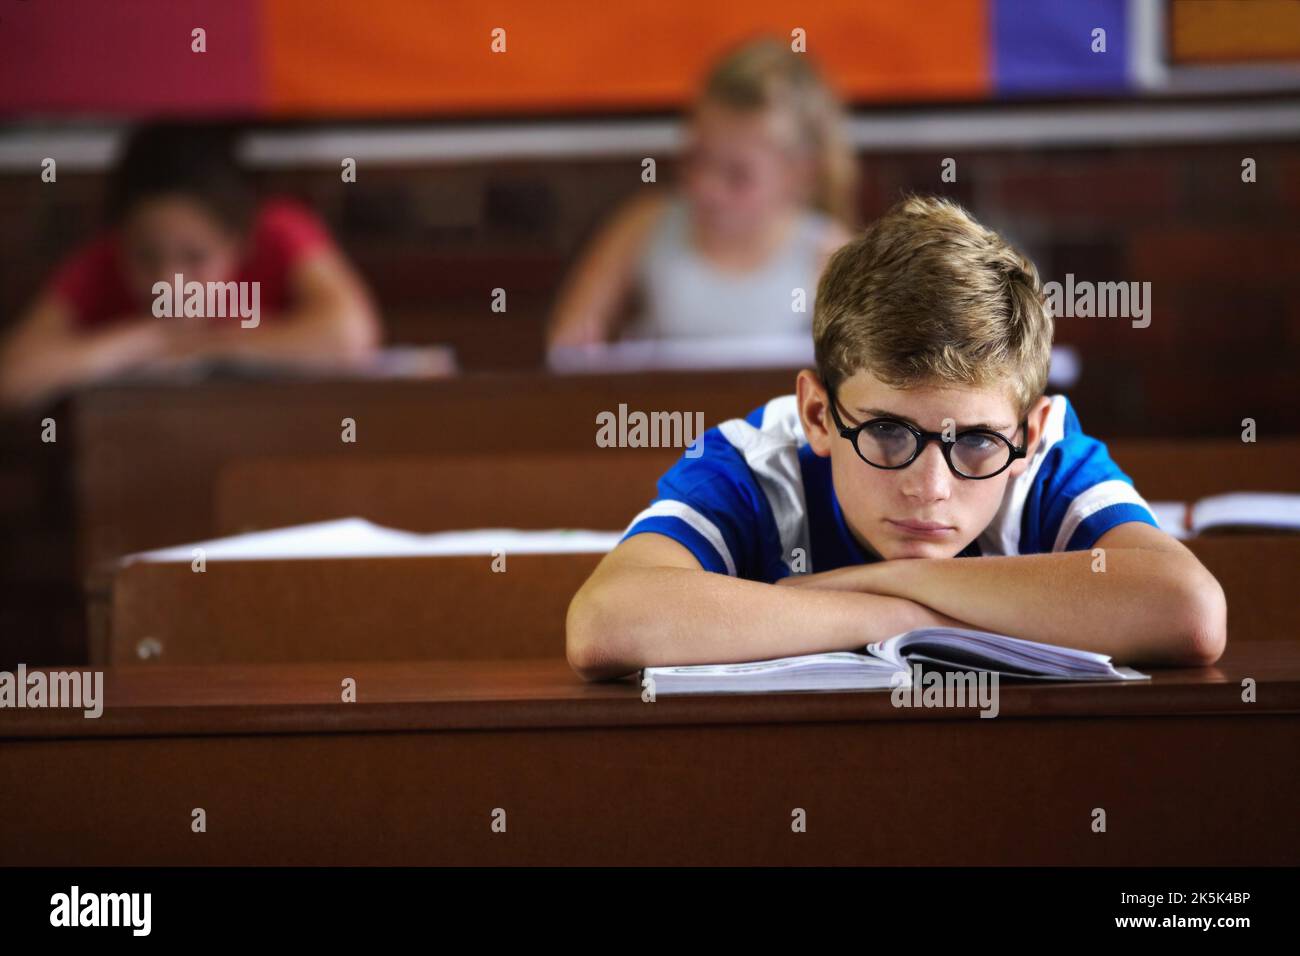 Bored of school. Young boy feeling overcome with boredom in the classroom. Stock Photo